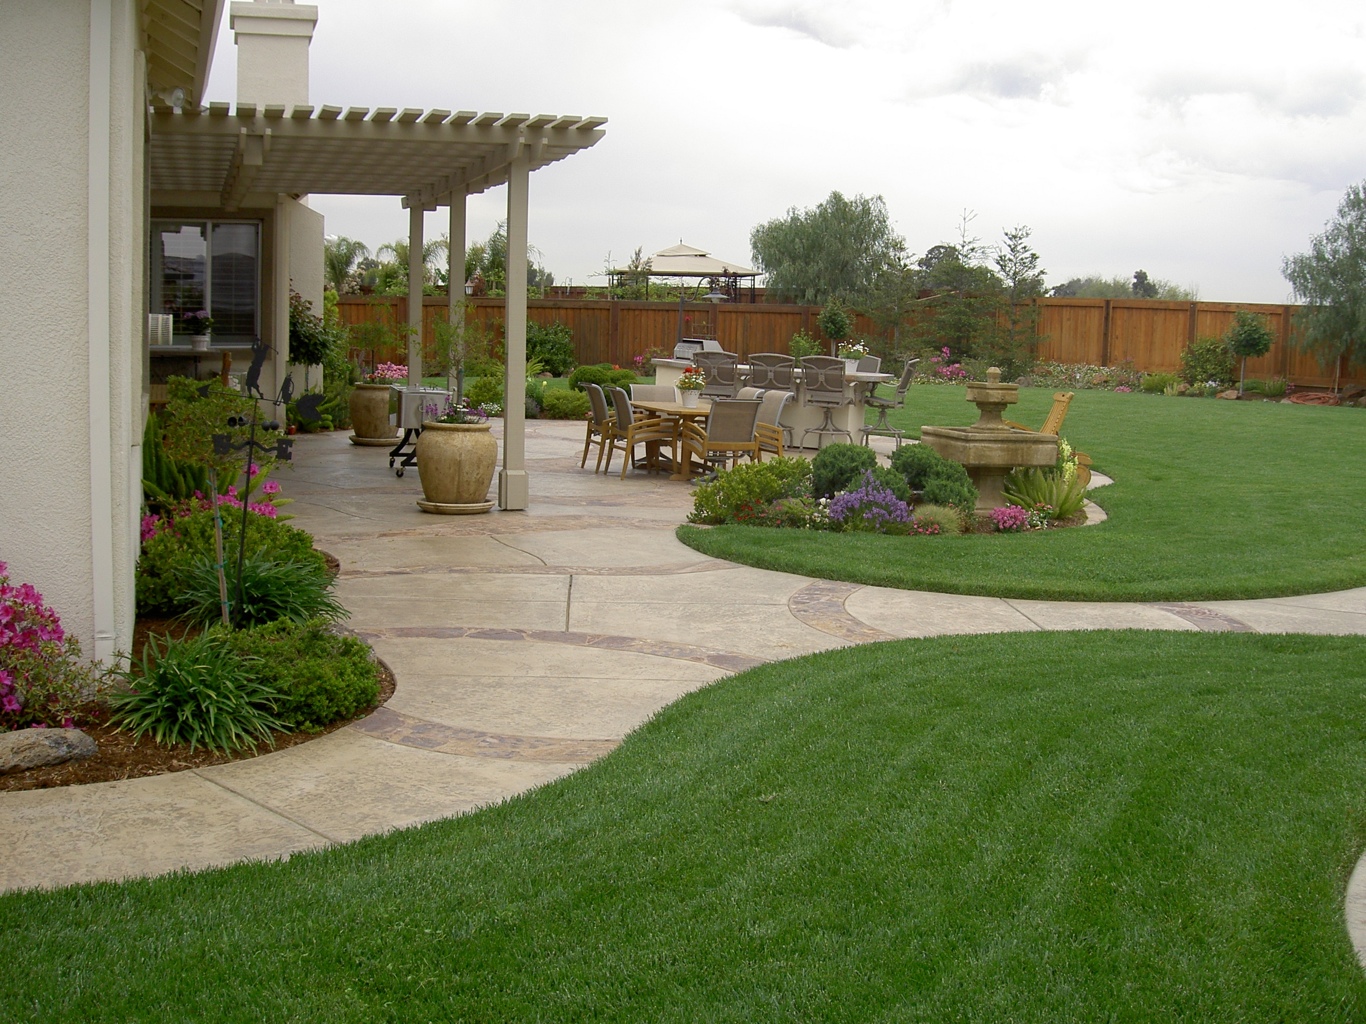 Better Looking with Backyard Landscaping Ideas - Interior Design Inspirations